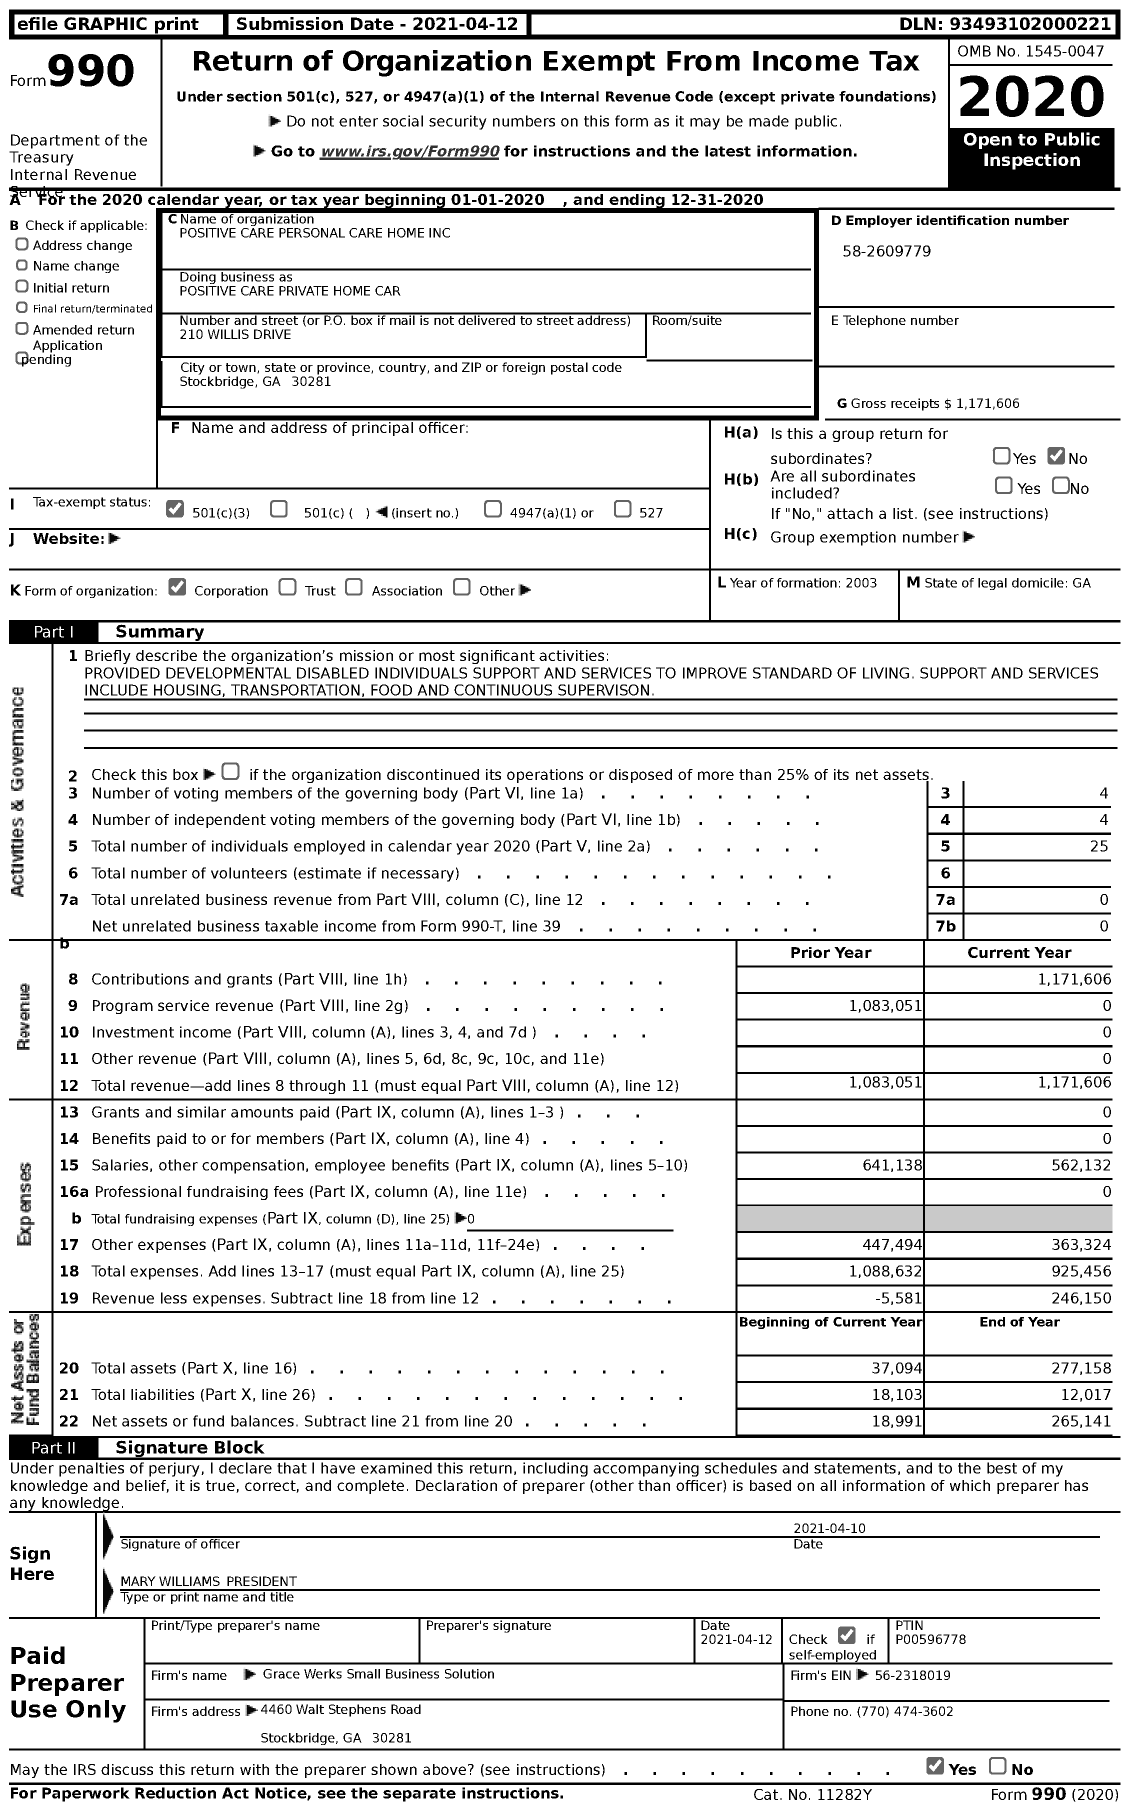 Image of first page of 2020 Form 990 for Positive Care Private Home Care